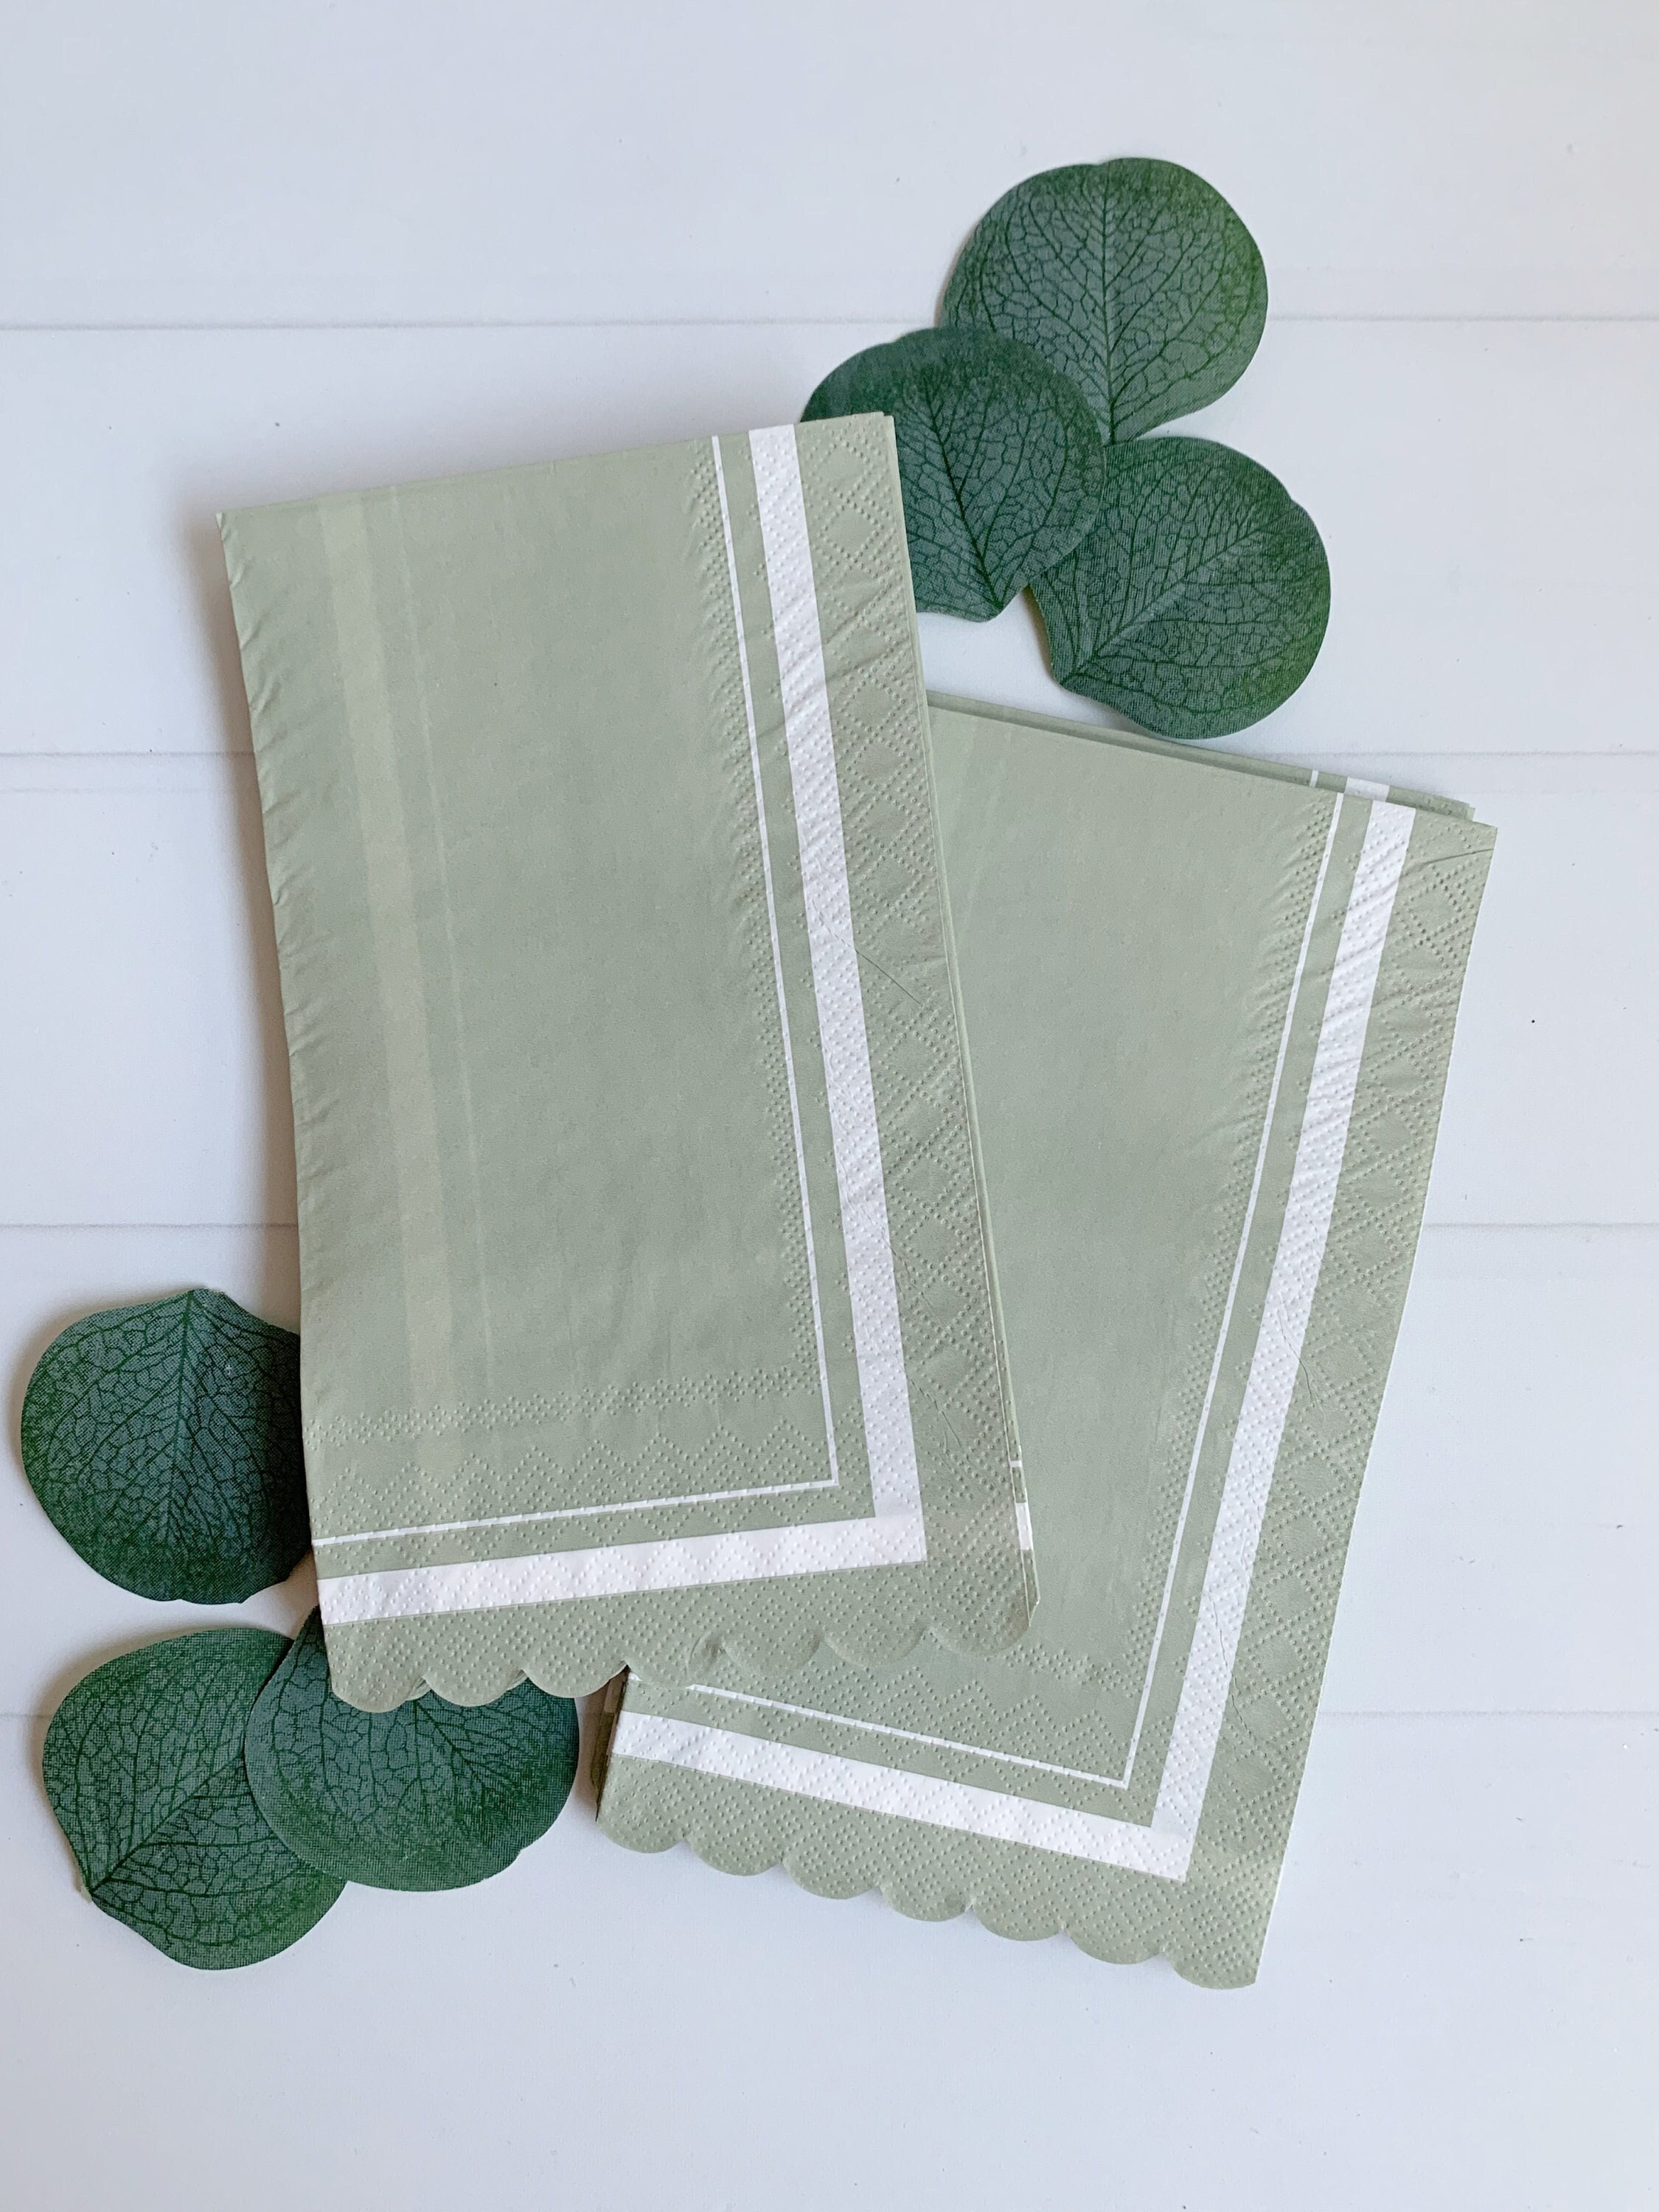 Chinoiserie Mint Green Square Embroidered Pagoda Motif Cloth Dinner Napkins  - 5